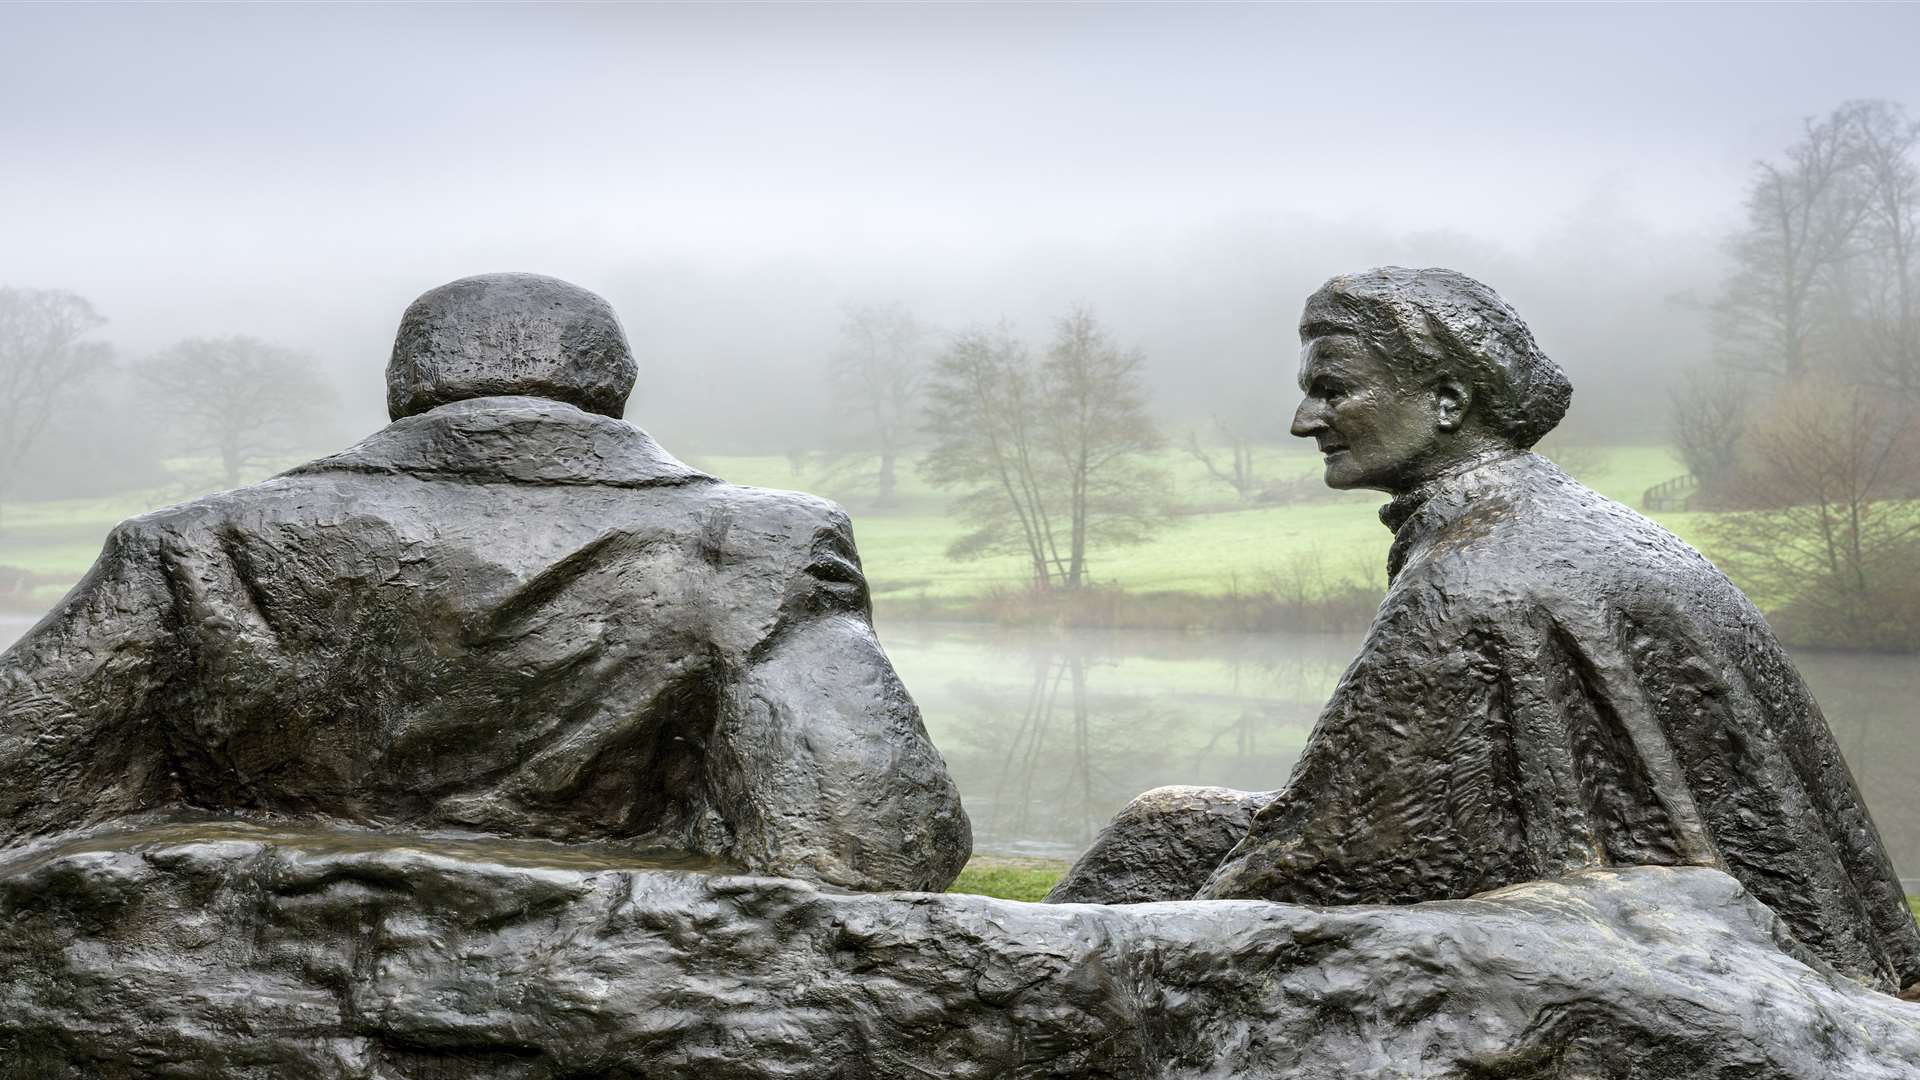 The Oscar Nemon statue of Winston and Clementine Churchill at Chartwell Picture: National Trust